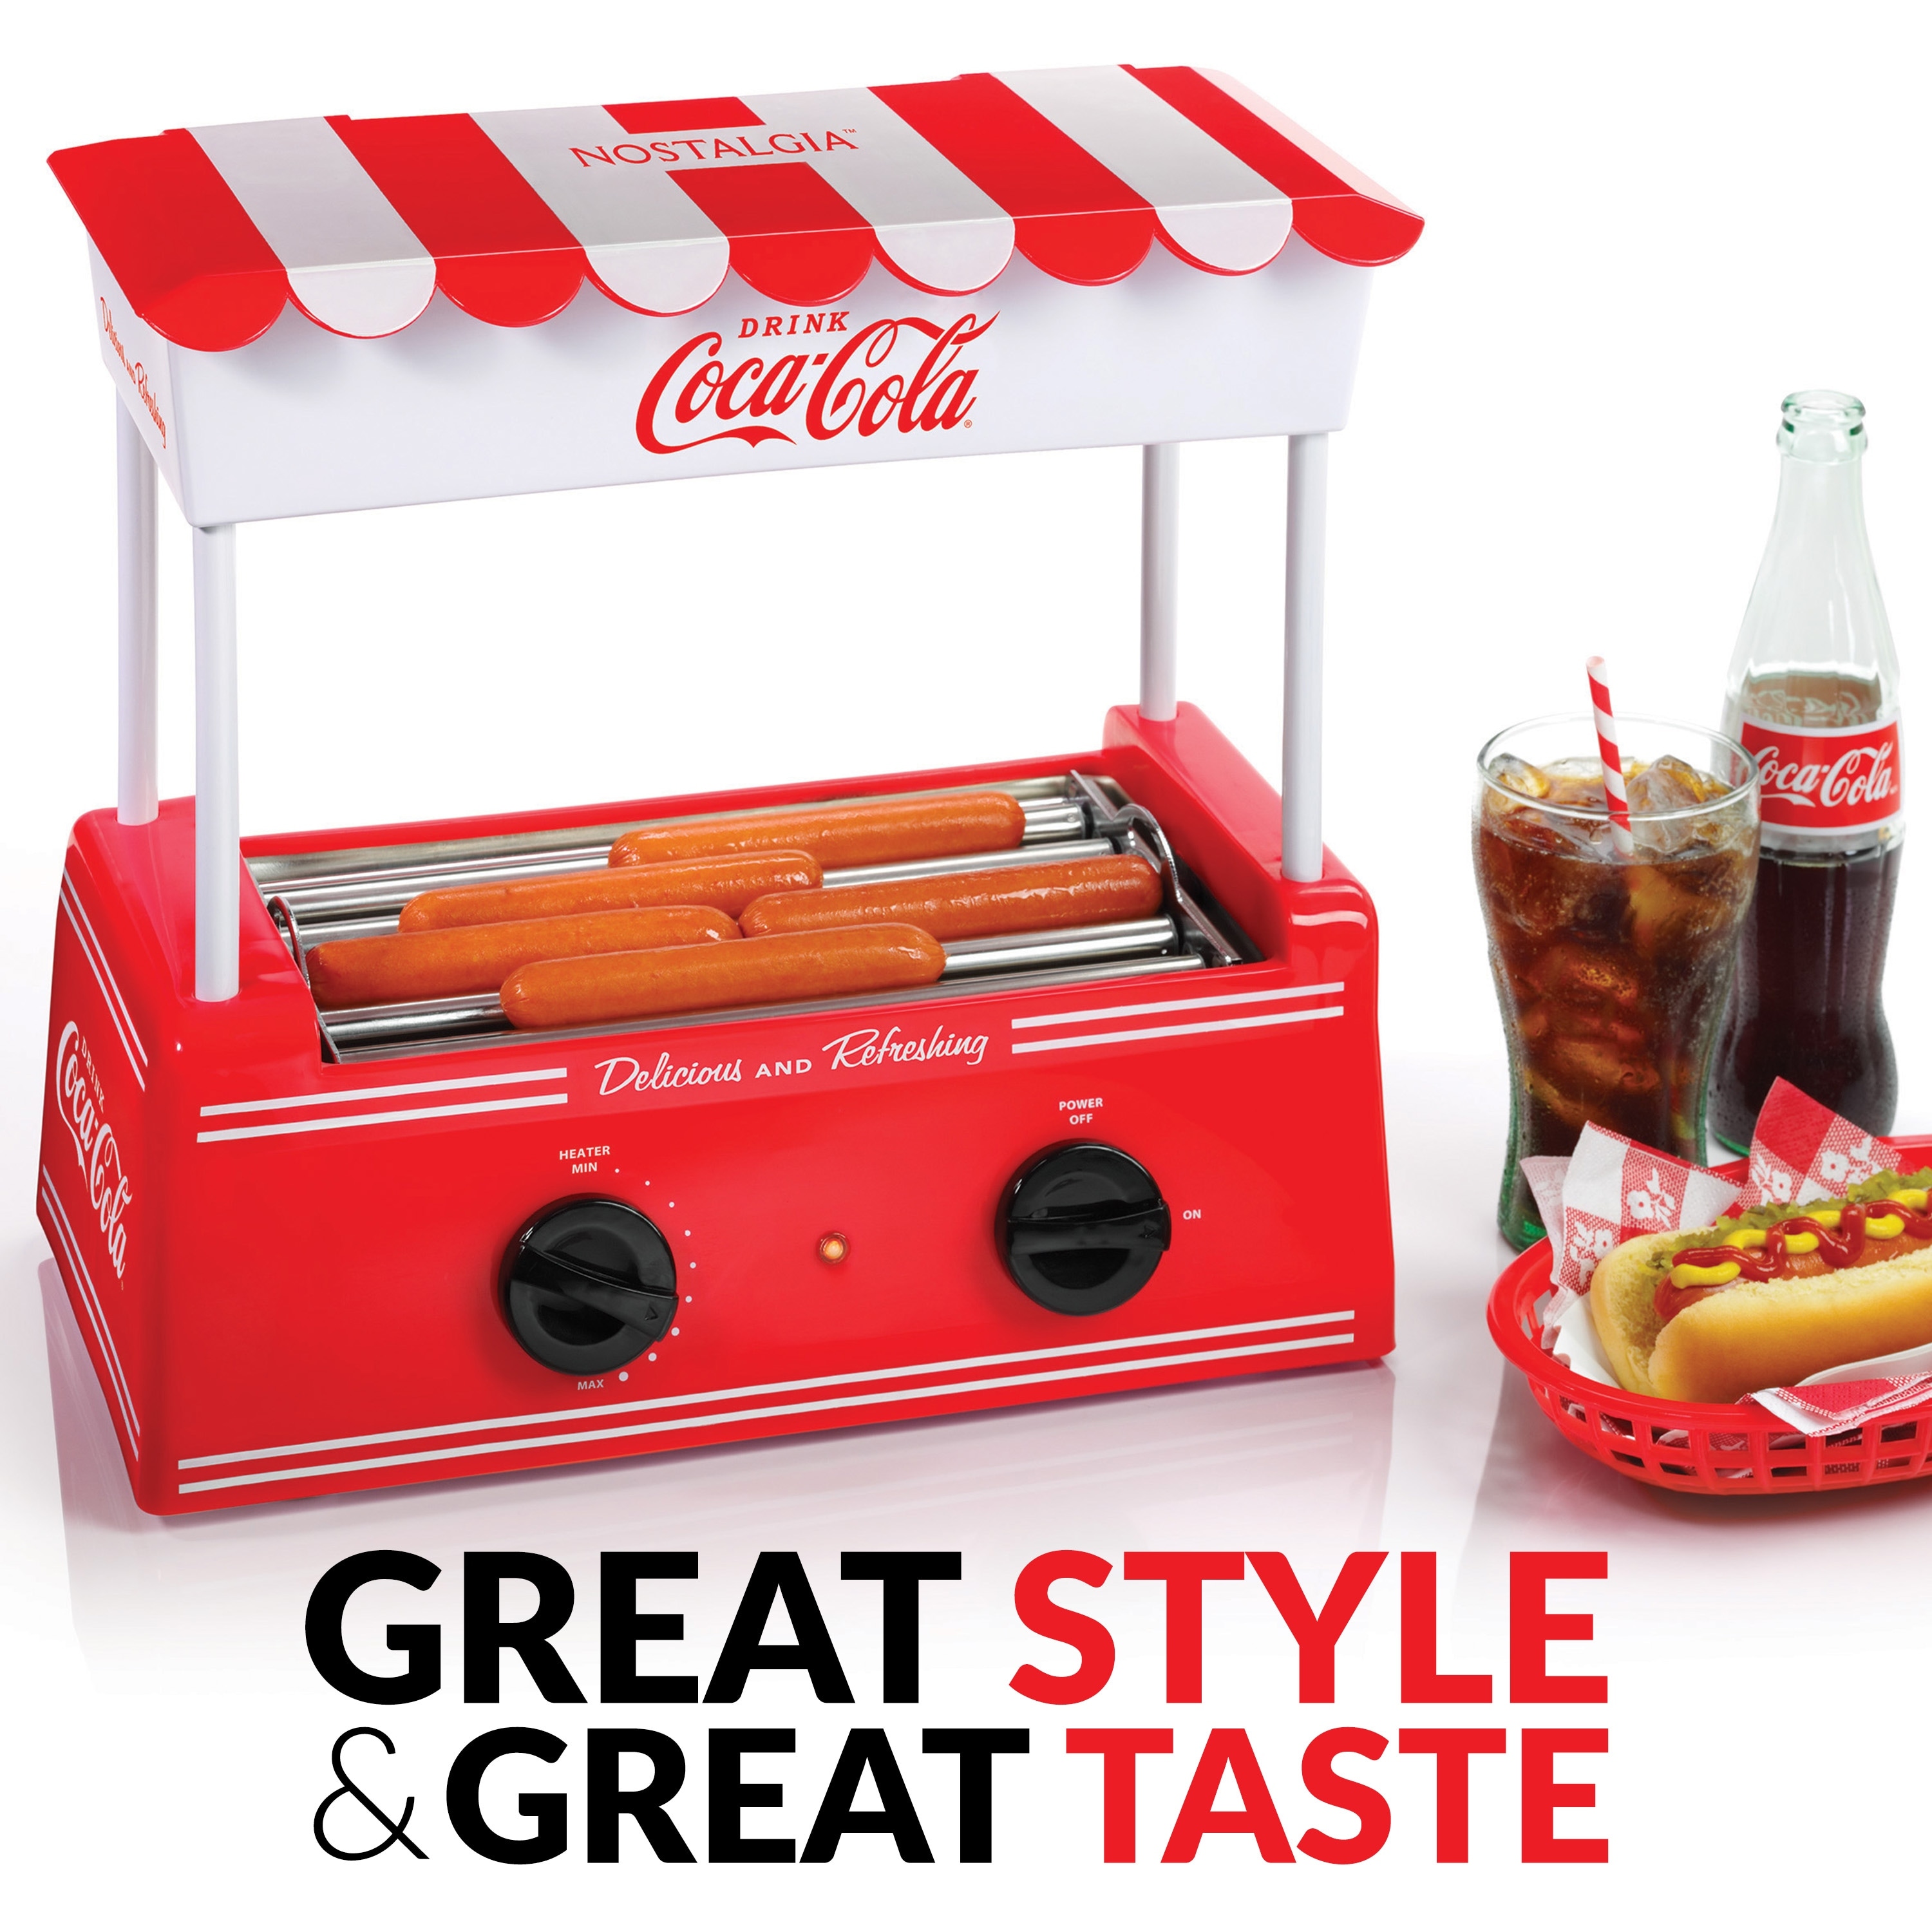 https://ak1.ostkcdn.com/images/products/is/images/direct/aa1edc1e8aa2a91c6a575d71c2f6dcc9187e6589/Nostalgia-CKHDR8CR-Coca-Cola-Hot-Dog-Roller.jpg